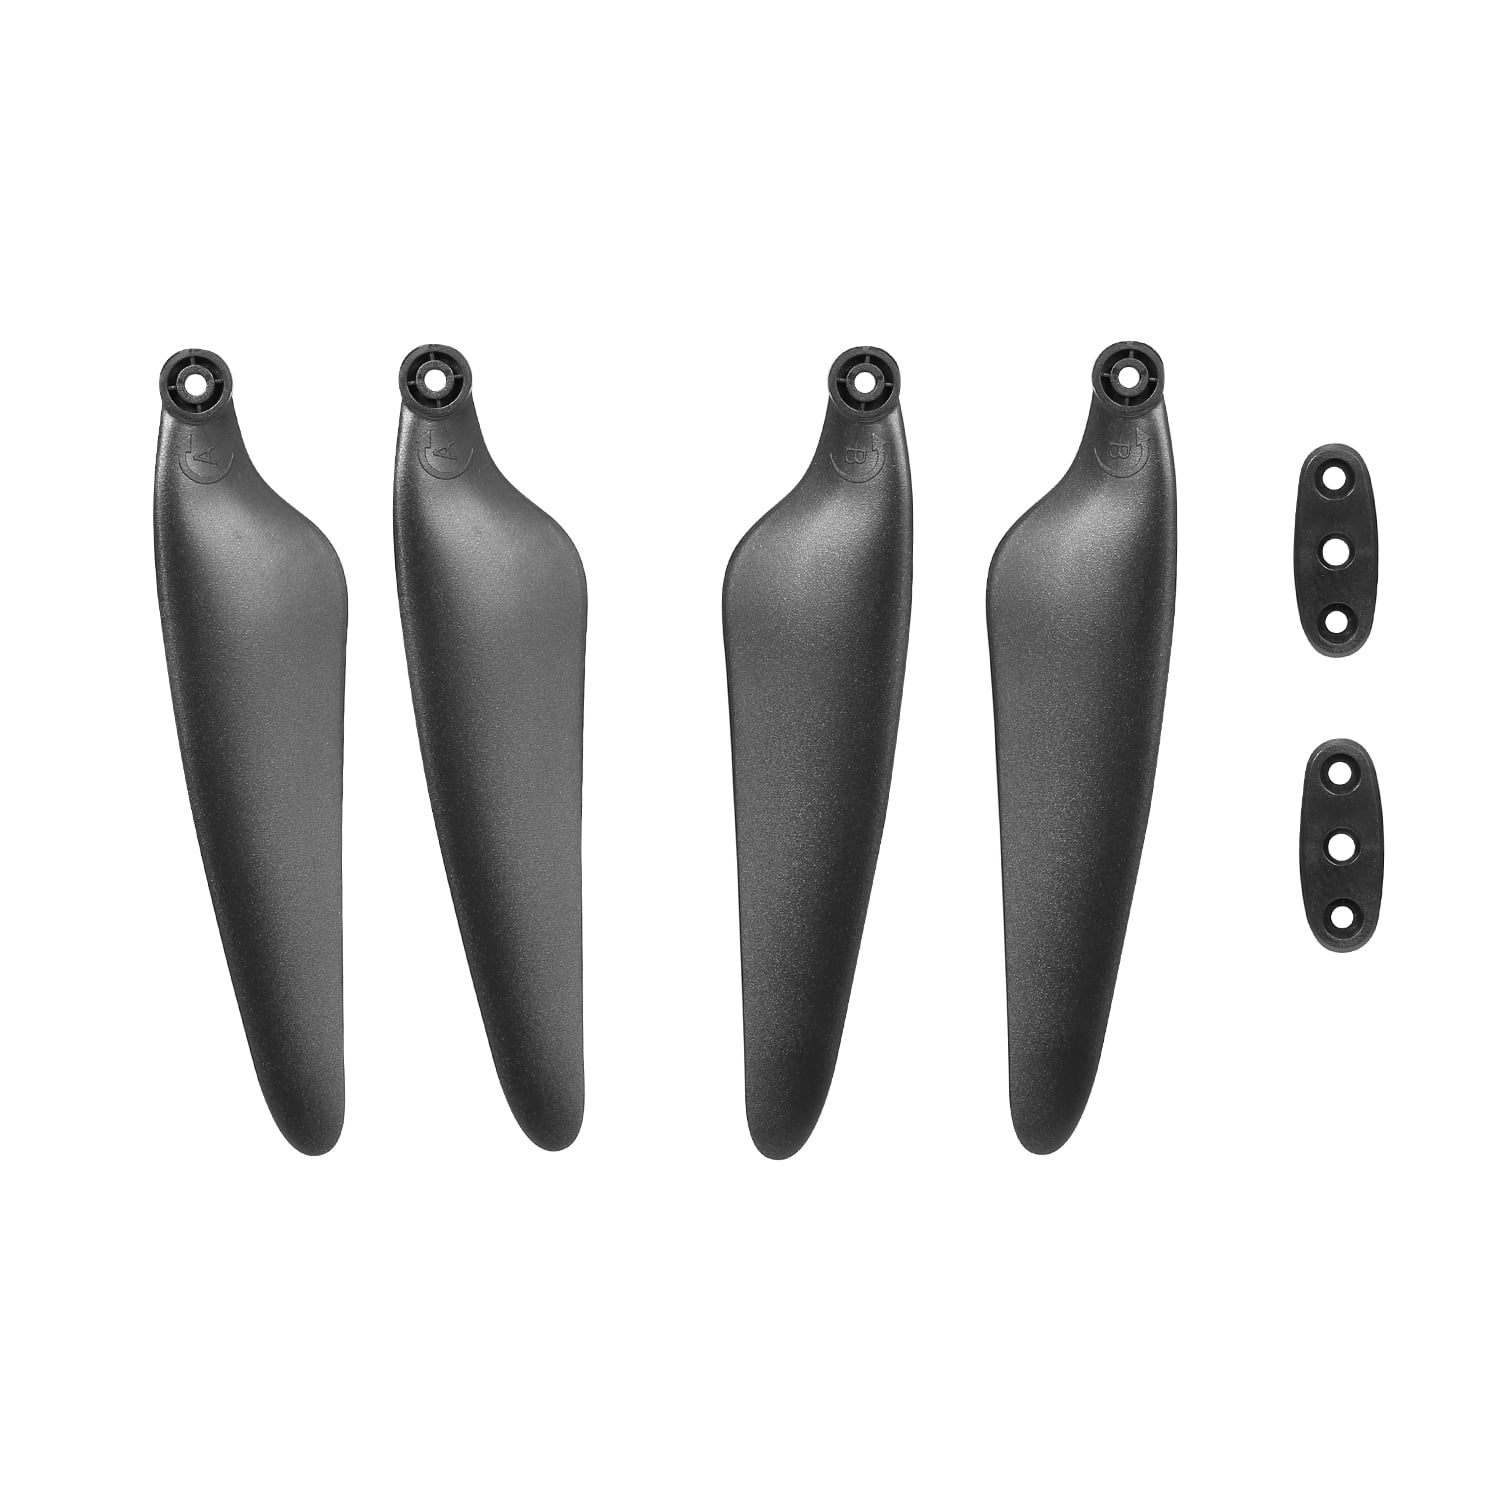 2 Pair RC Drone Propellers Wing Fits for Hubsan Zino H117S Quadcopter Accessory❤